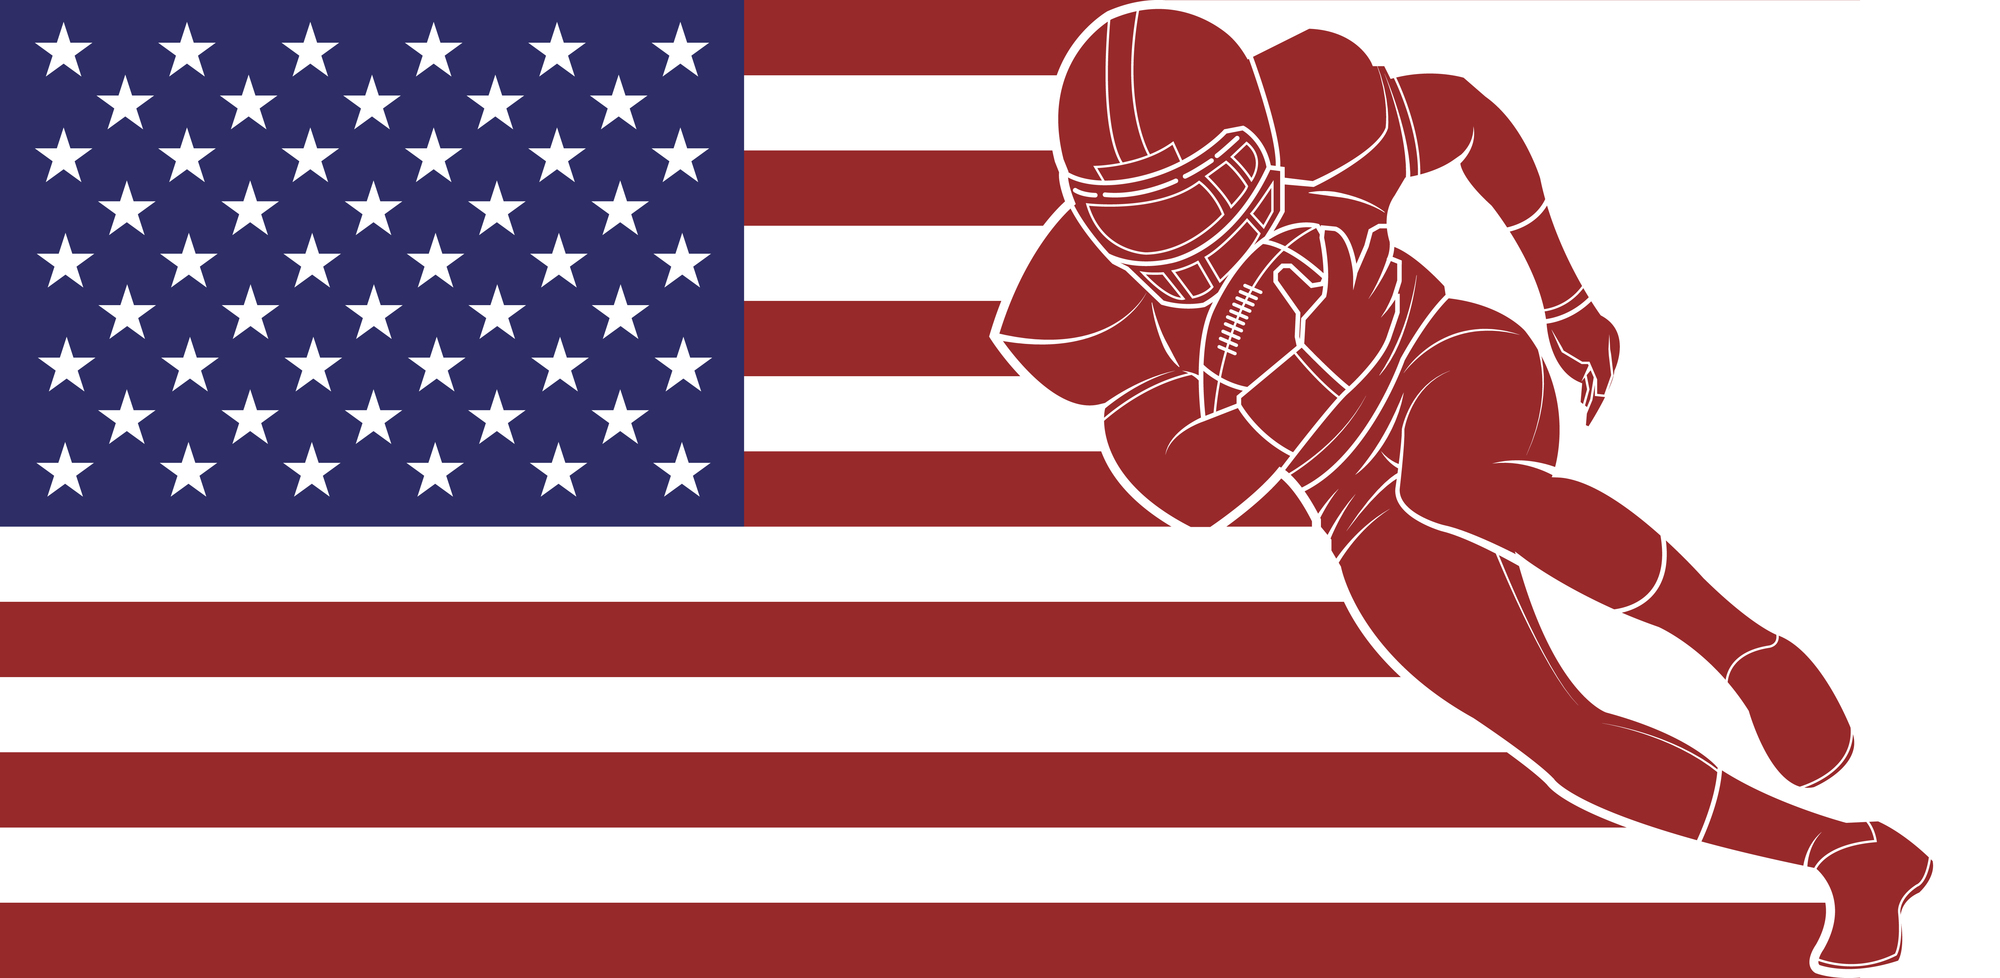 American football running with the ball on flag background.